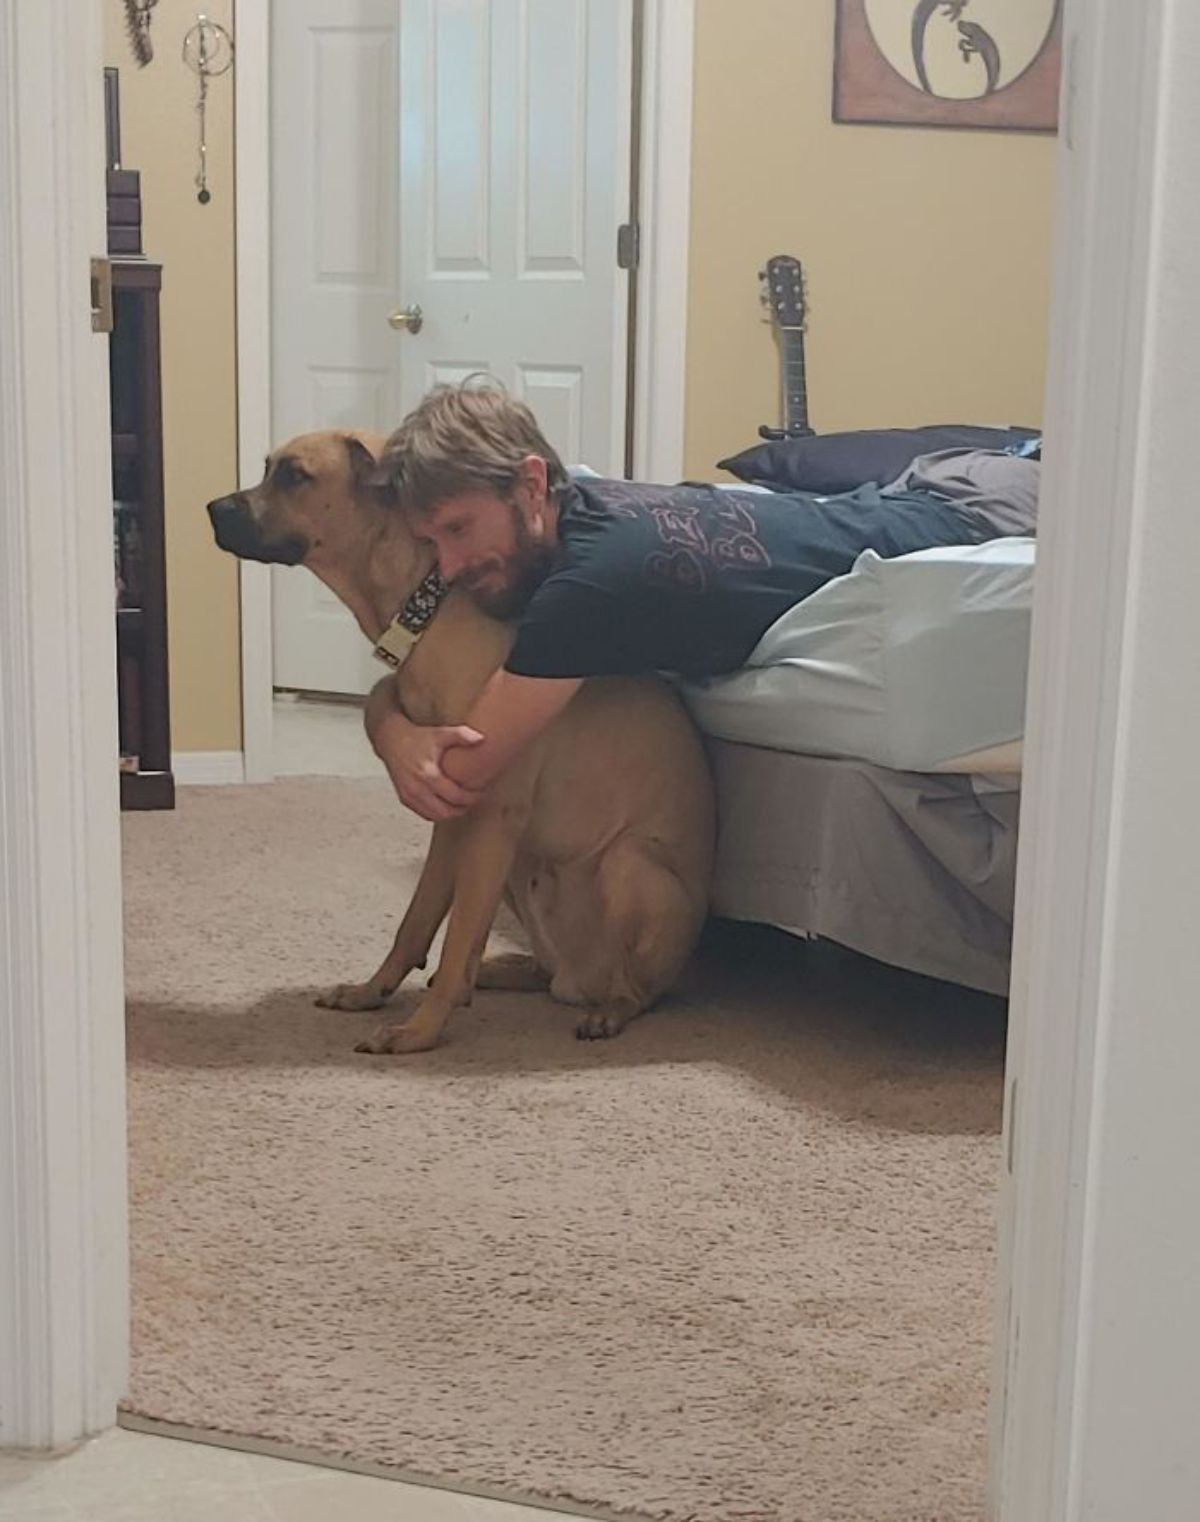 brown dog sitting on floor getting hugged by a man laying on a bed